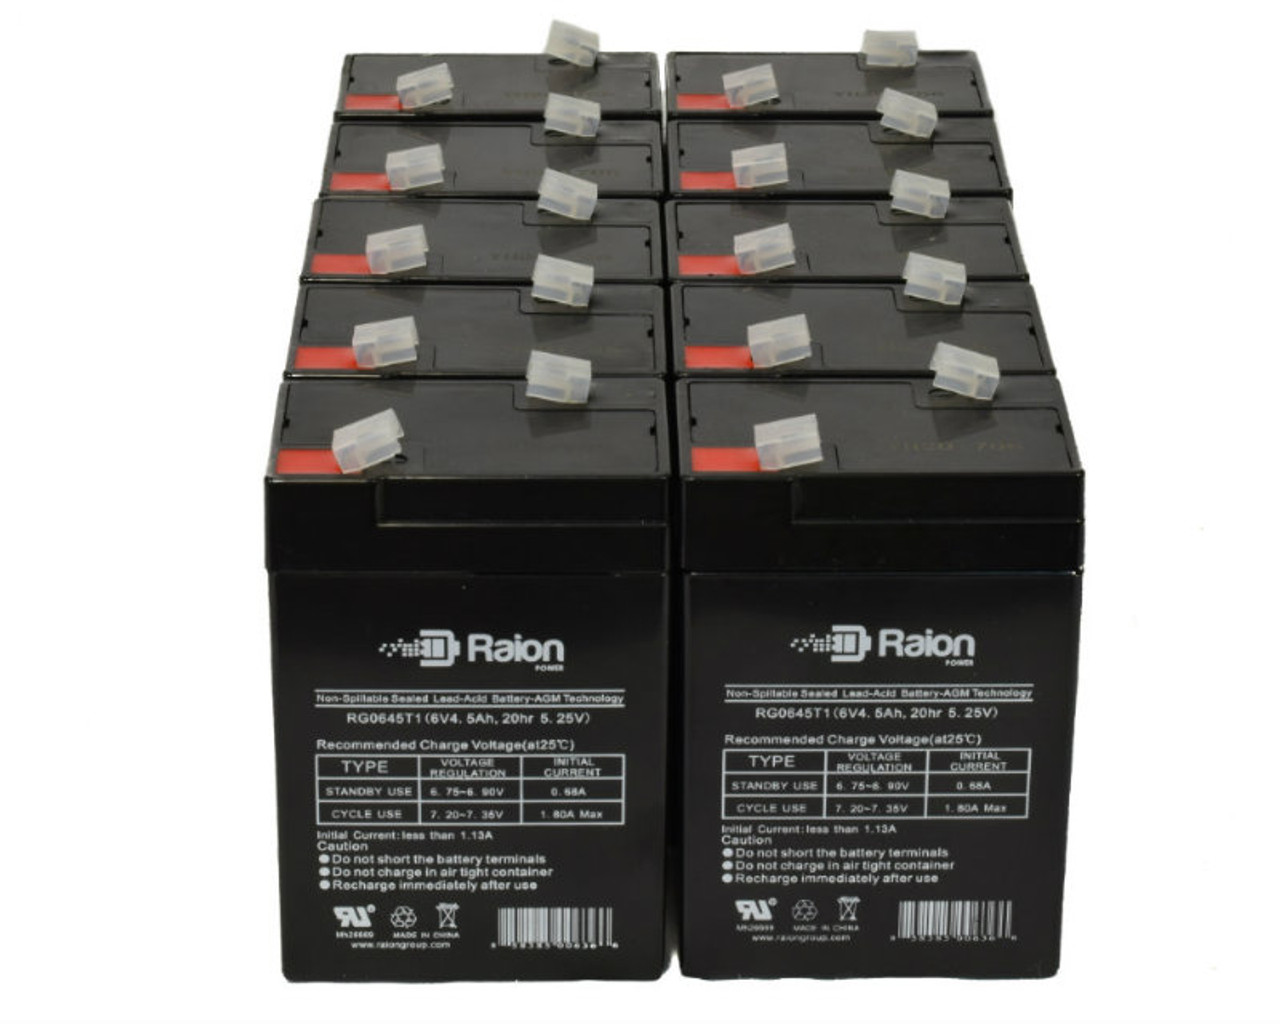 Raion Power 6 Volt 4.5Ah RG0645T1 Replacement Battery for Power Energy GB6-4 - 10 Pack